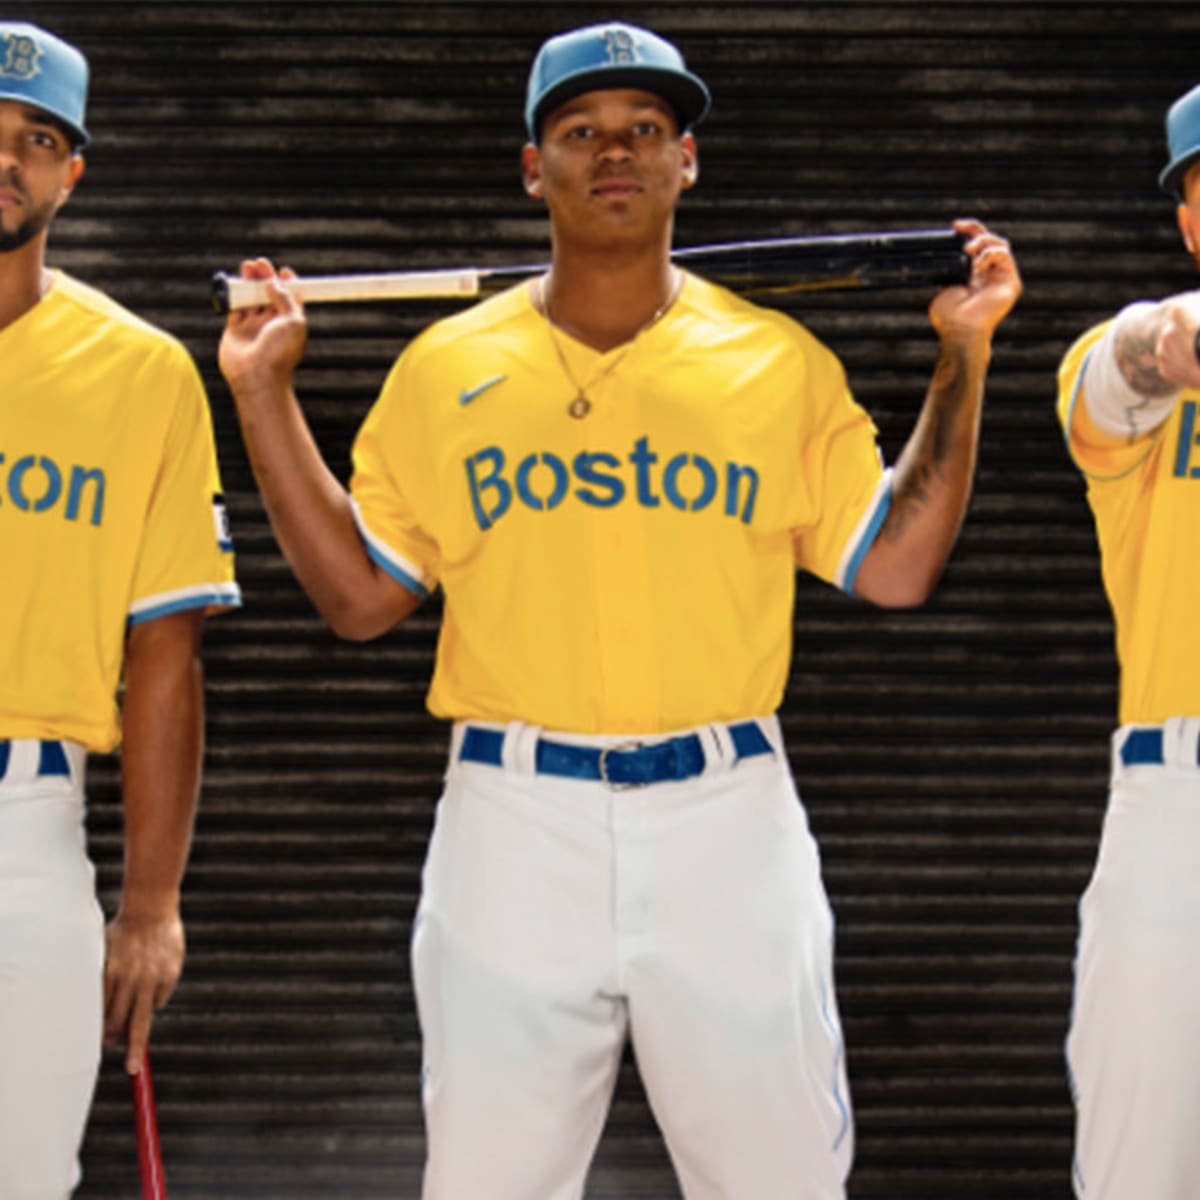 The Boston Red Sox Have Traded Their Red, White, And Blue For  Banana-Colored Jerseys - Boston Uncovered